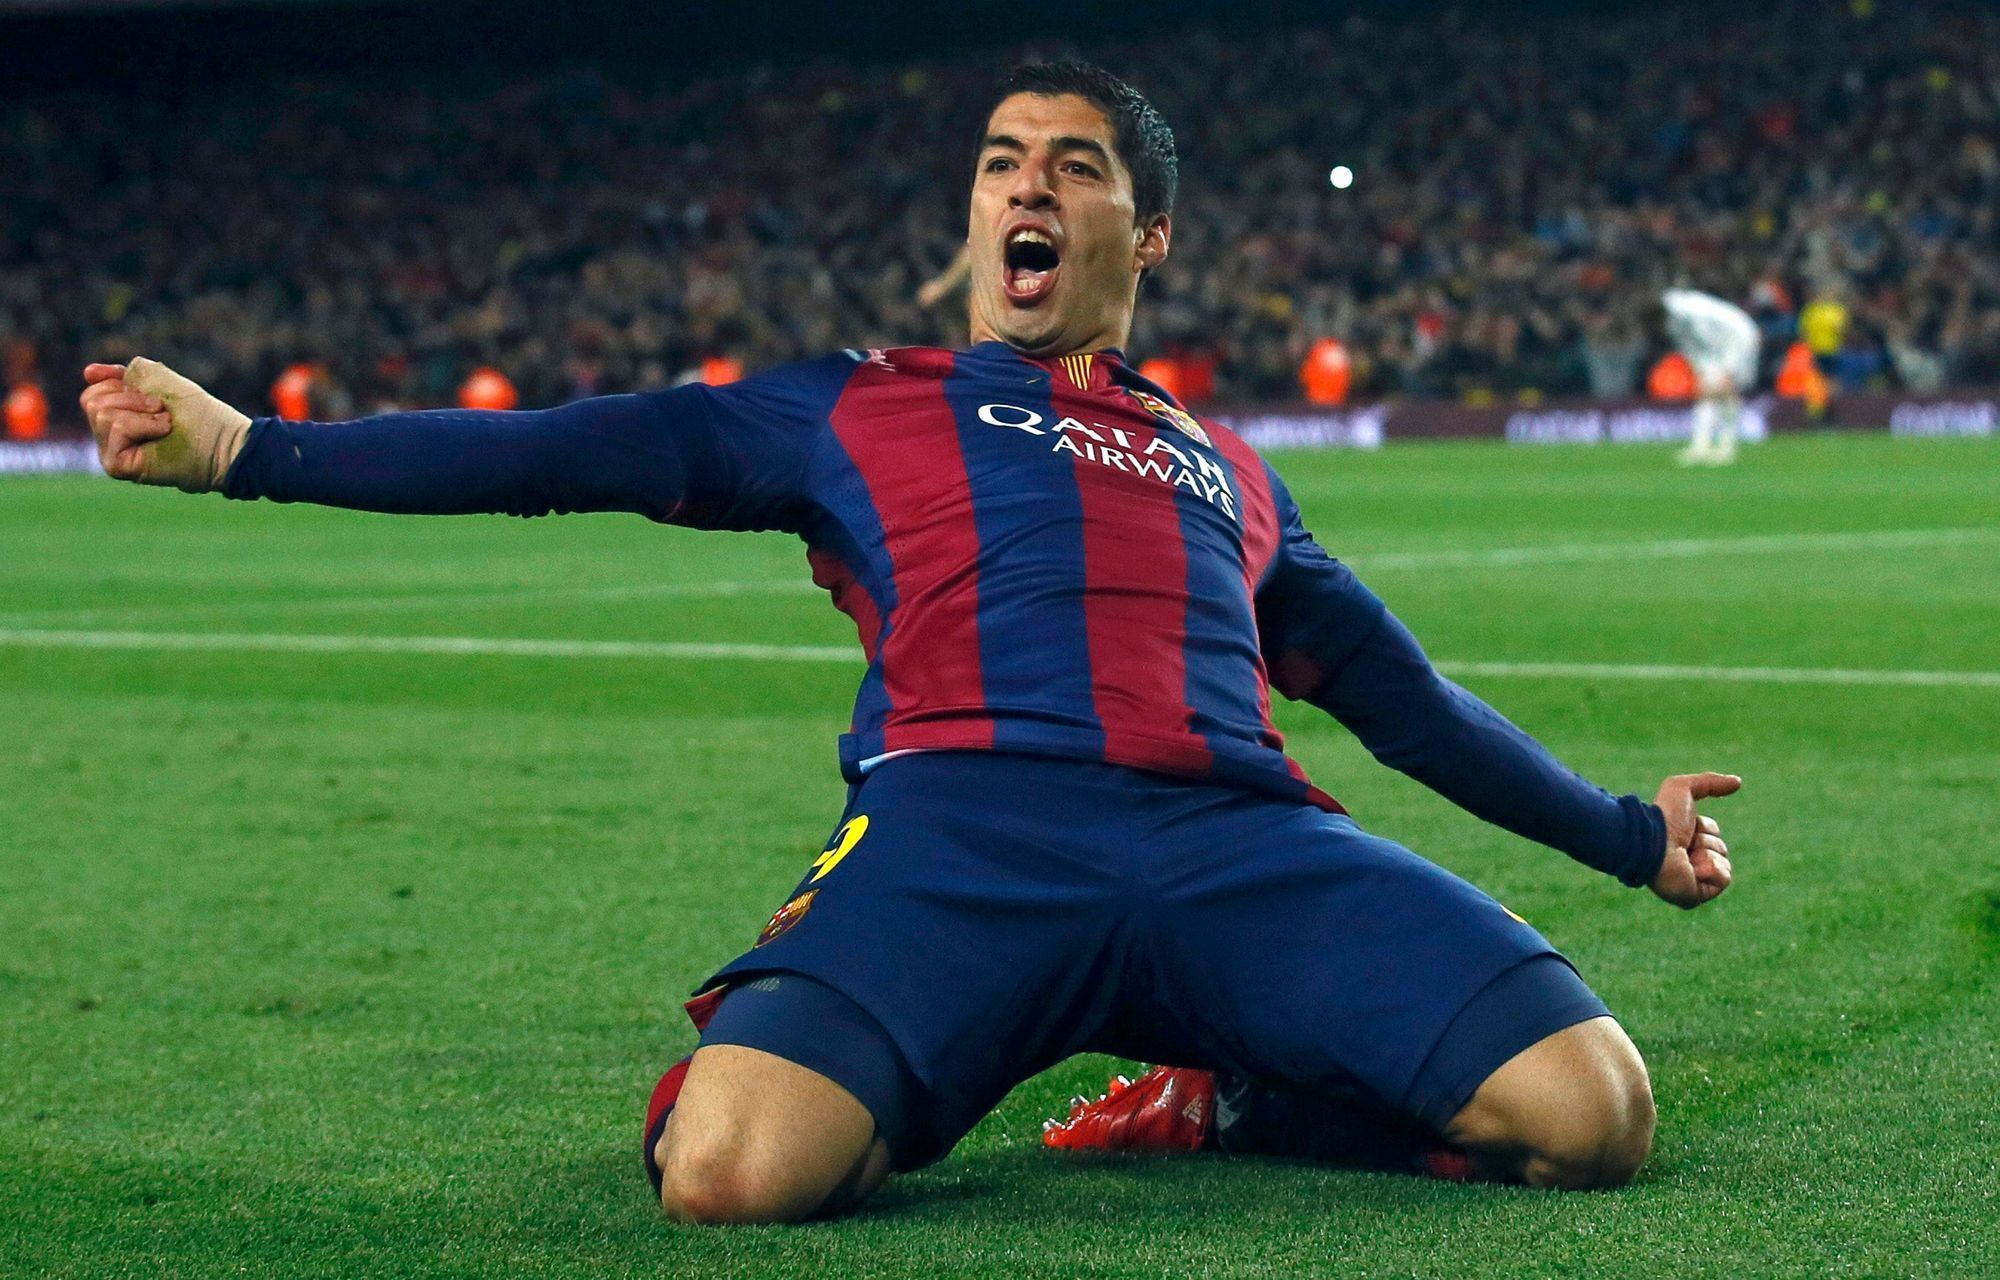 Barcelona's Suarez celebrates after scoring a goal against Real Madrid during their Spanish first division &quot;Clasico&quot; soccer match at Camp Nou stadium in Barcelona